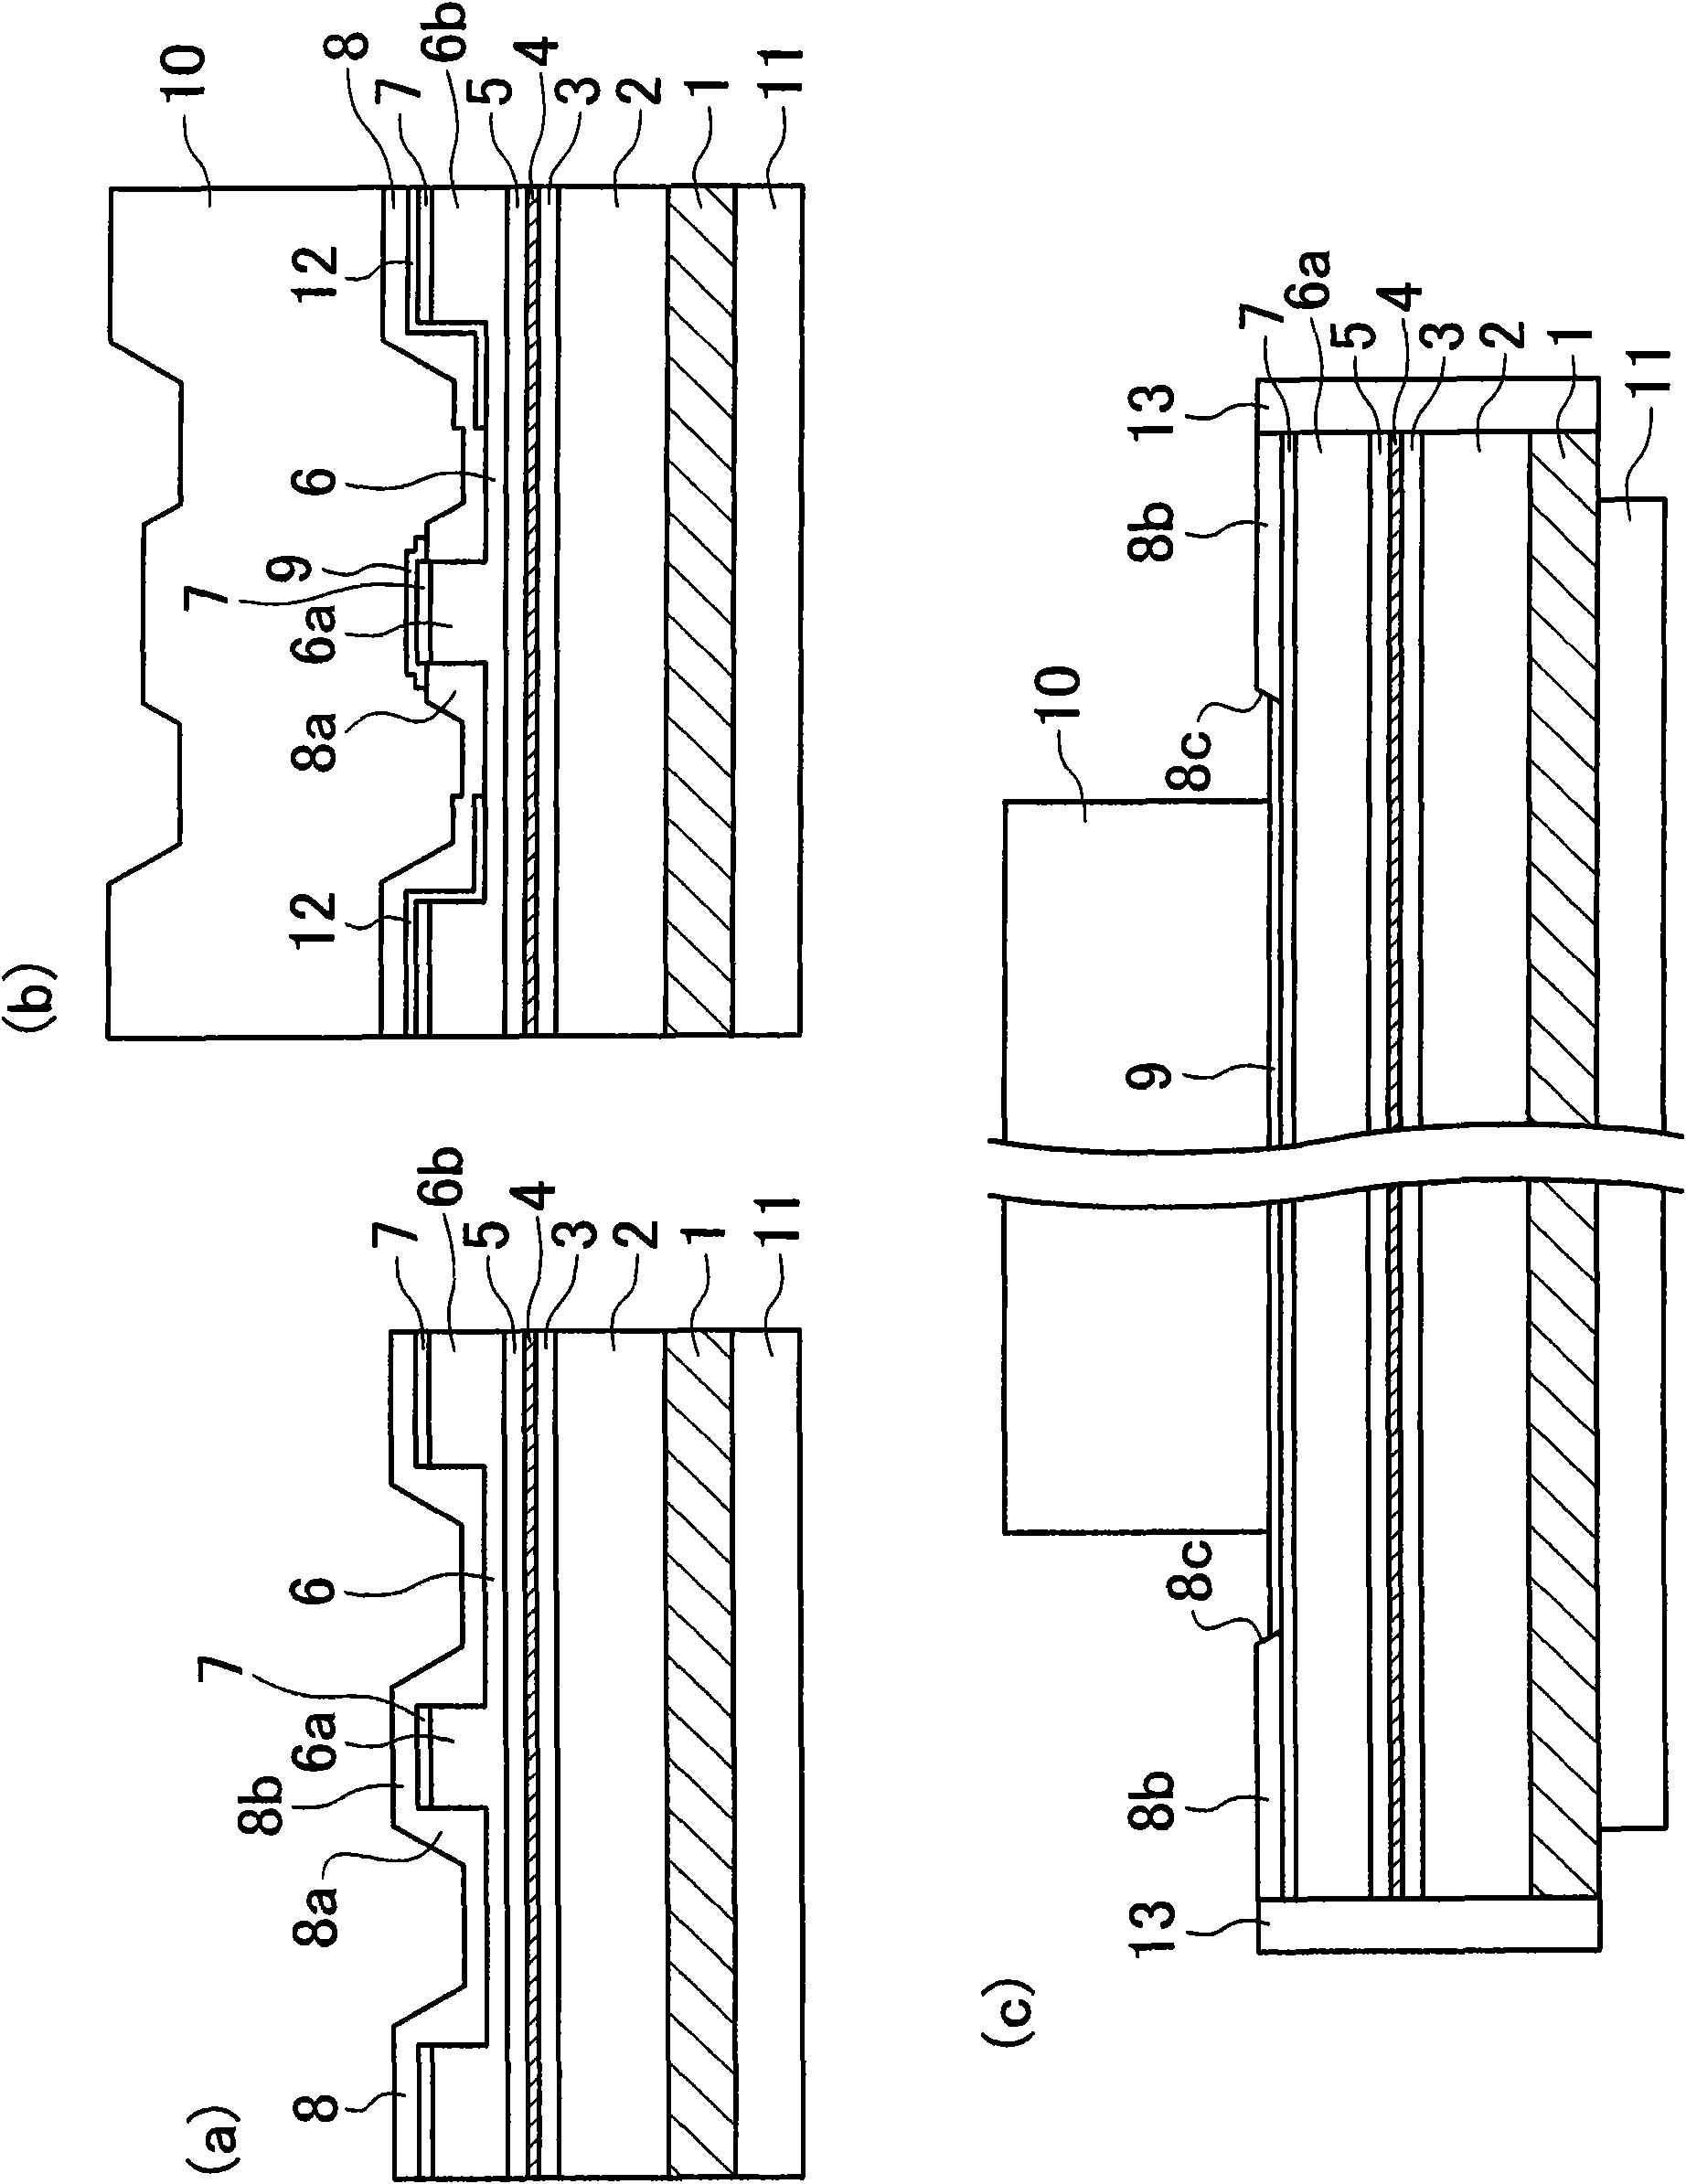 Semiconductor laser device and method of manufacturing the device